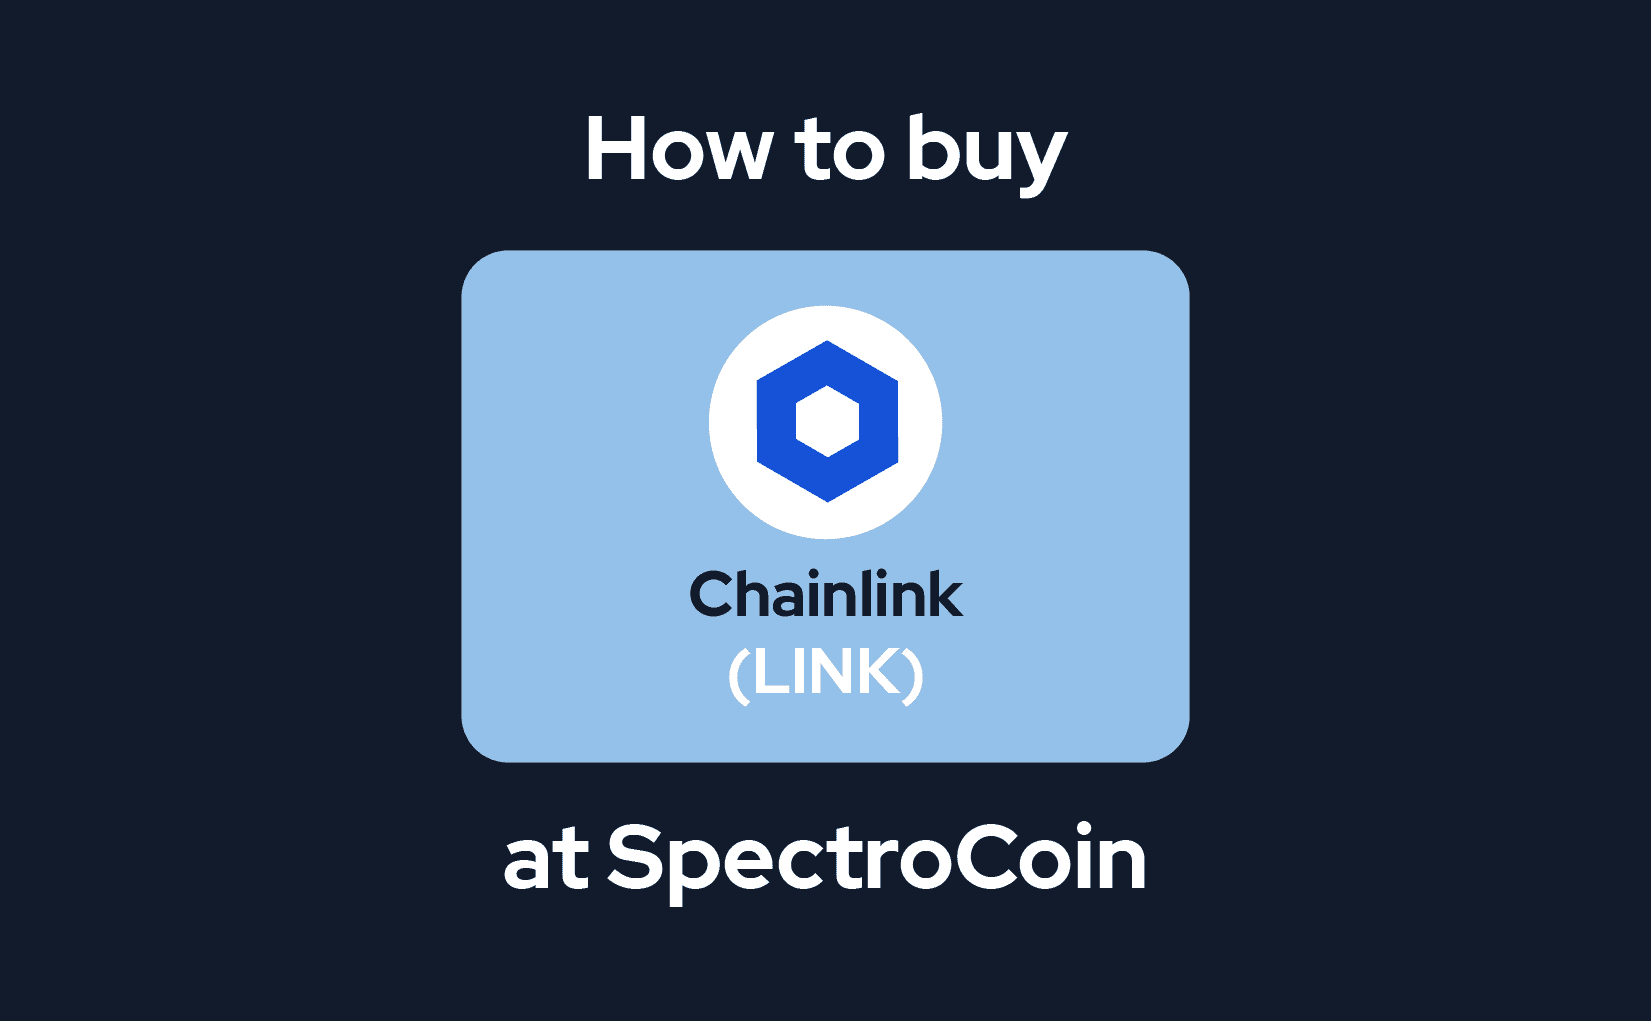 Guide to buying Chainlink at SpectroCoin